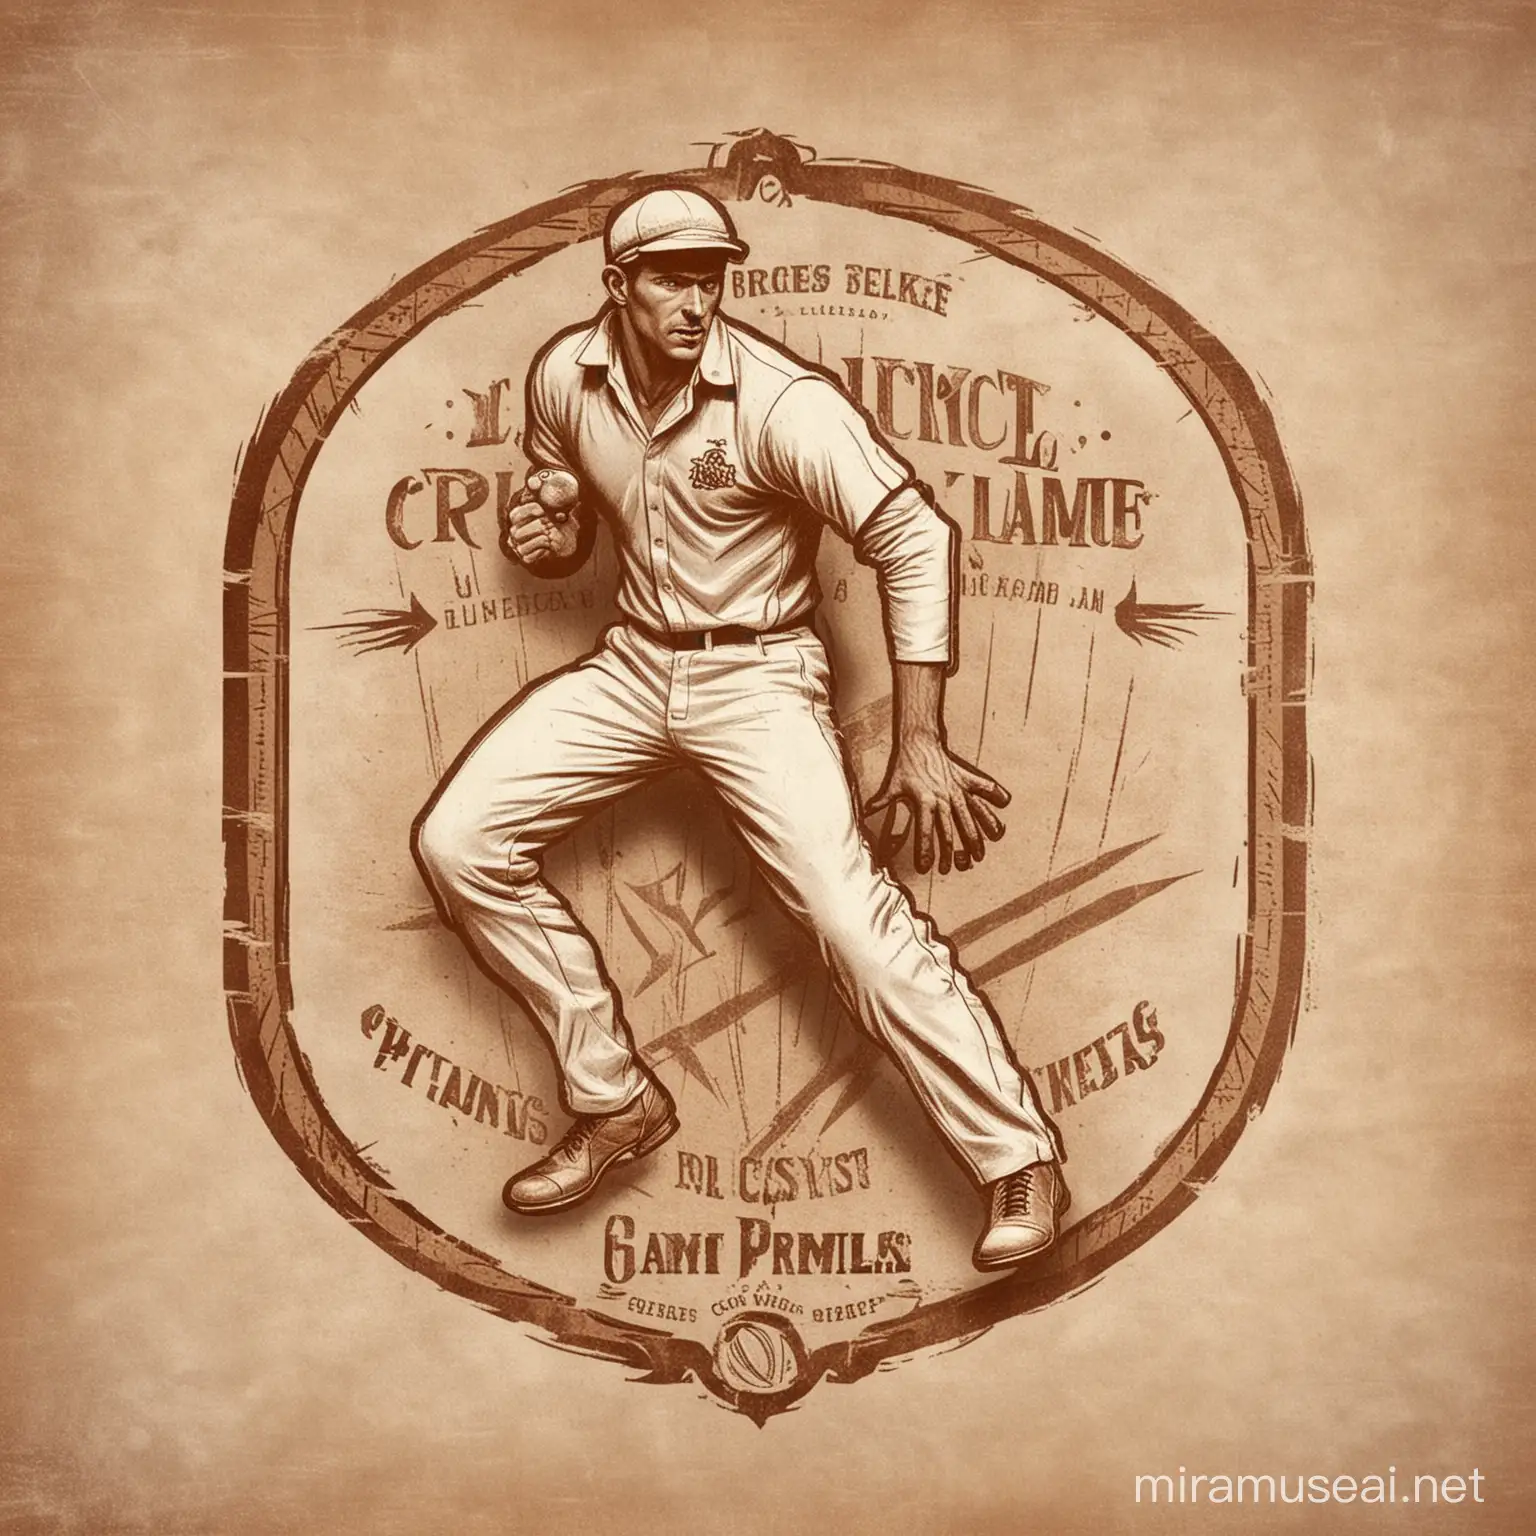 A vintage-style cricket league logo featuring a classic fast bowler in whites, bowling a delivery with two fallen wickets. The logo has a weathered leather texture.